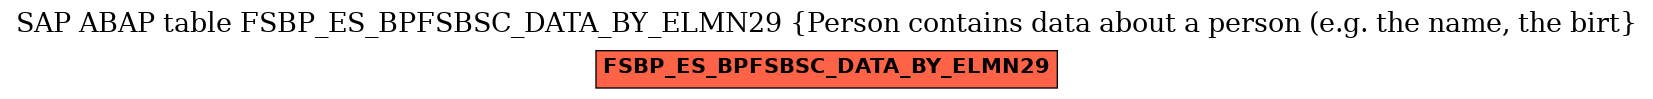 E-R Diagram for table FSBP_ES_BPFSBSC_DATA_BY_ELMN29 (Person contains data about a person (e.g. the name, the birt)